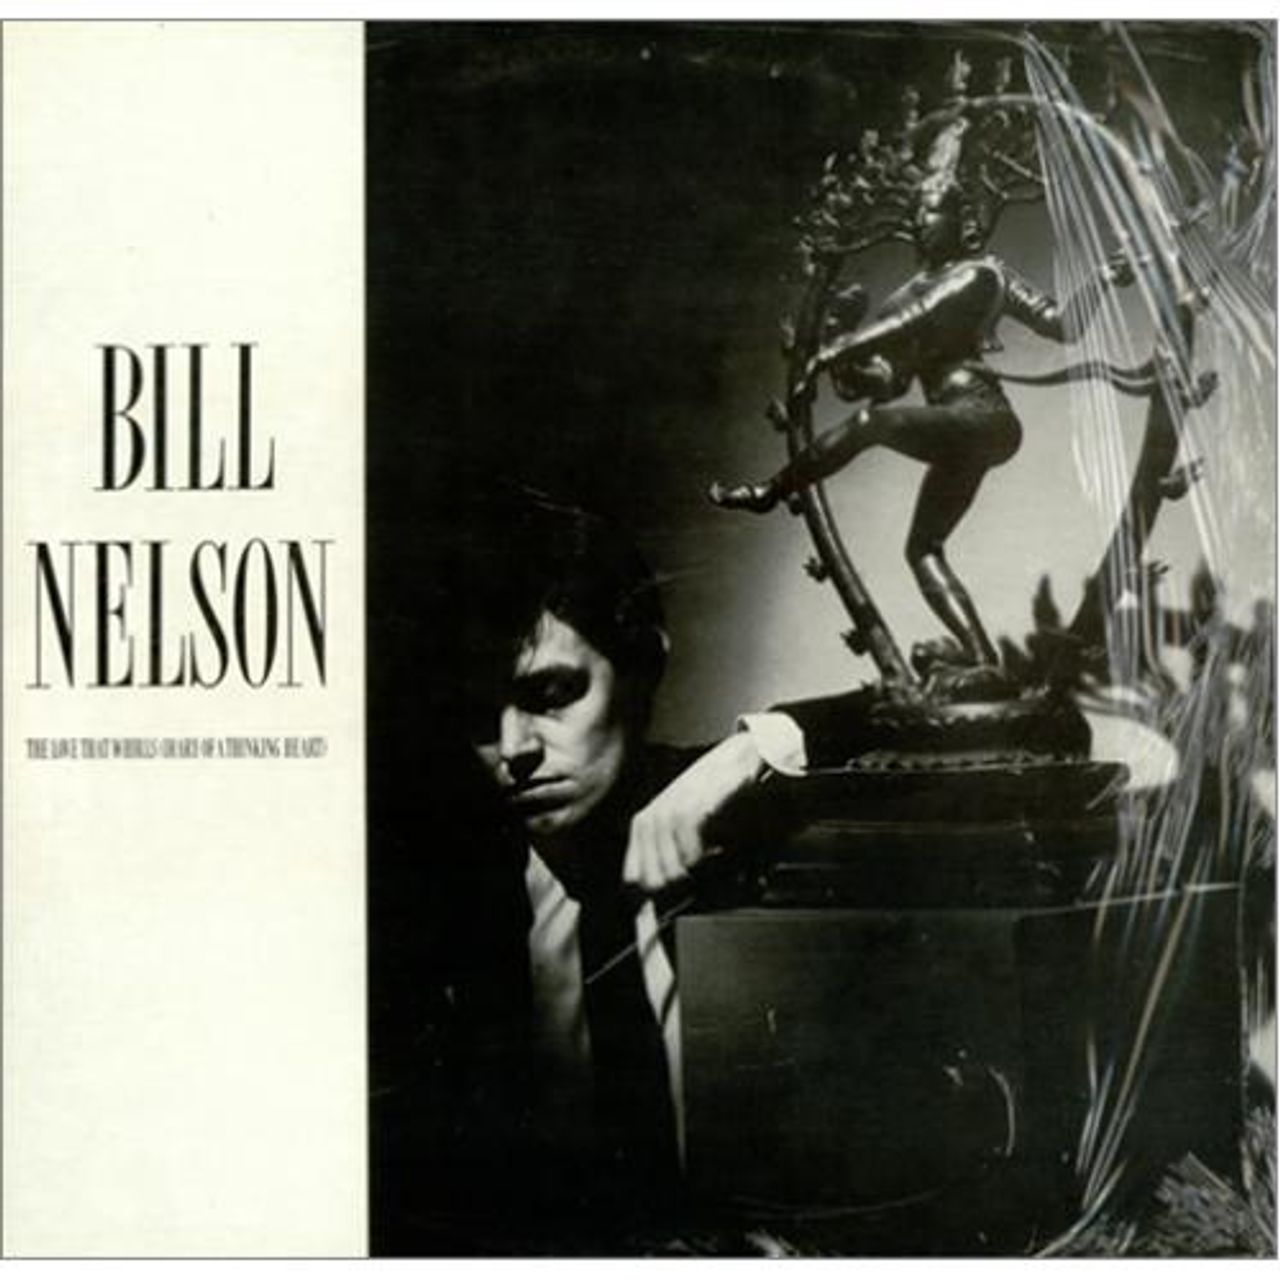 Bill Nelson The Love That Whirls (Diary Of A Thinking Heart) UK 2-LP vinyl record set (Double LP Album) WHIRL3